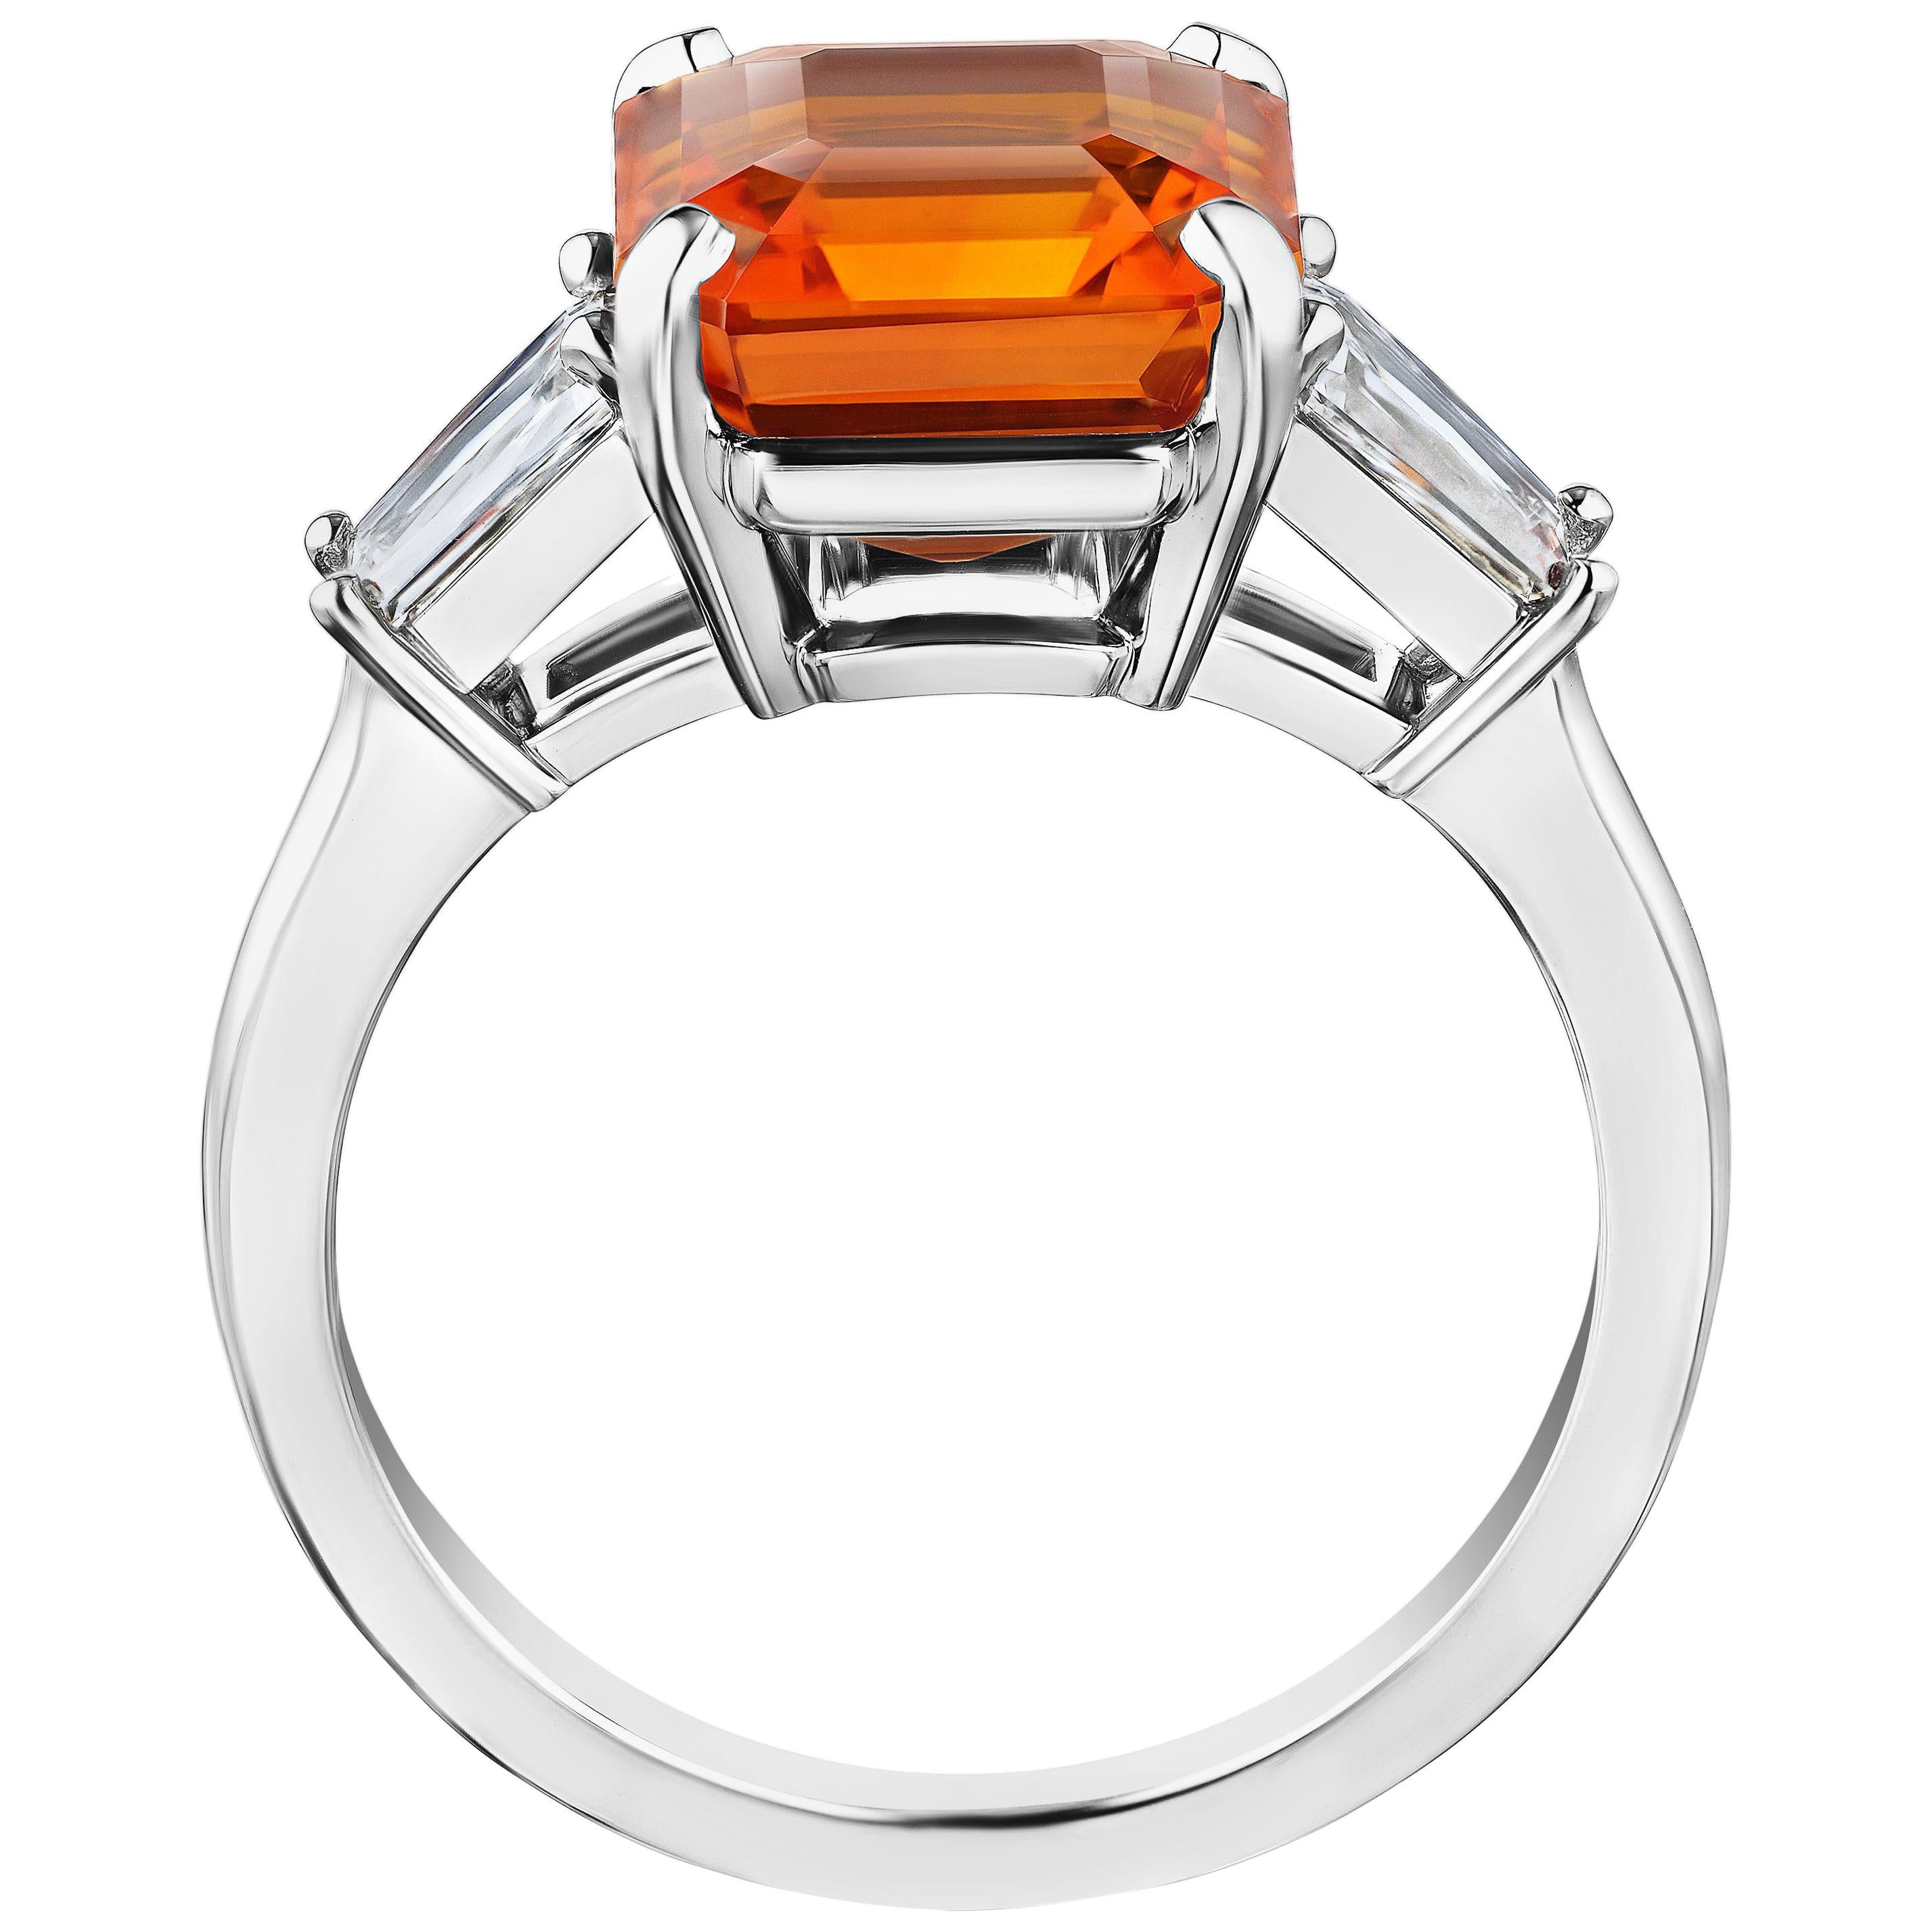 6.01 carat square emerald cut orange sapphire with tapered emerald cut diamonds .89 carats set in a platinum ring. Ring is currently a size 7. Resizing to your finger size is included.